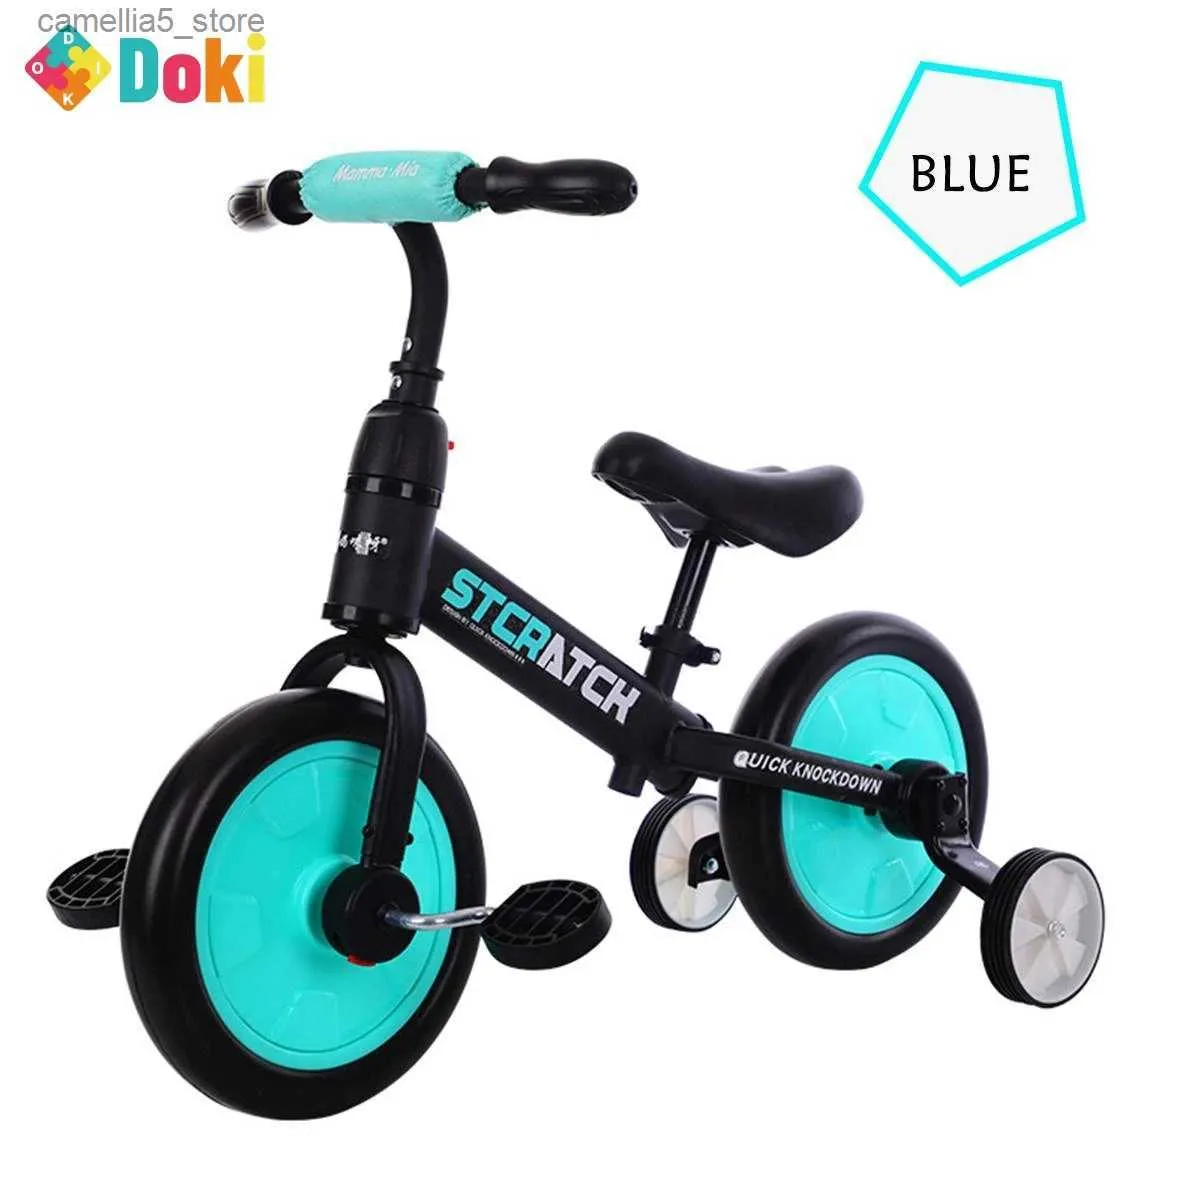 Bikes Ride-Ons Baby Balance Bike Learn To Walk Get Balance Sense No Foot Pedal Riding Toys for Kids Baby Toddler 1-5 years Child Tricycle Bike Q231018